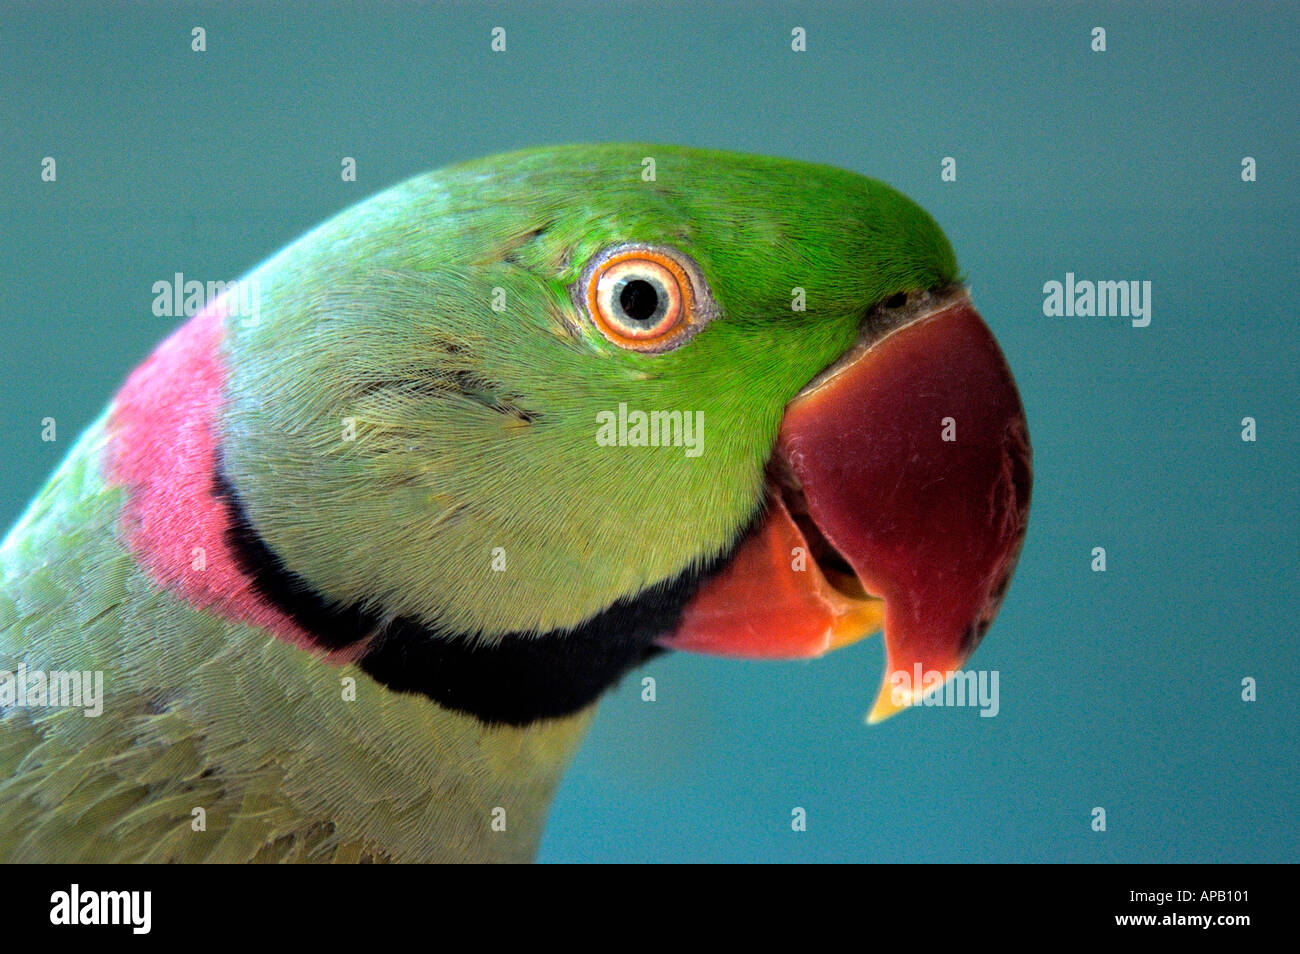 Icarus, a male Alexandrine parrot from southern India living at Airlie Beach, Whitsunday Airport, Queensland, Australia. Stock Photo